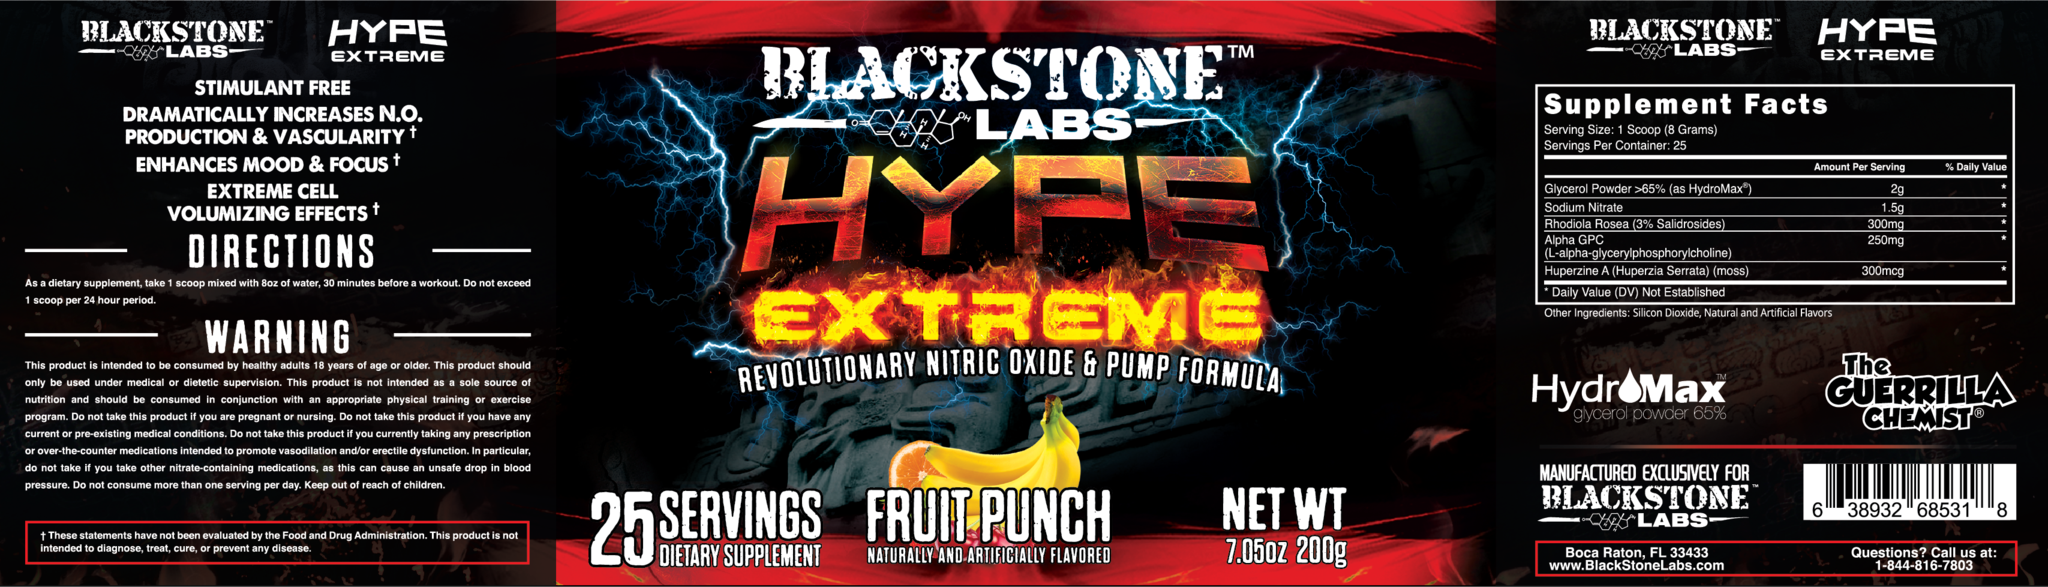 Hype Extreme Label